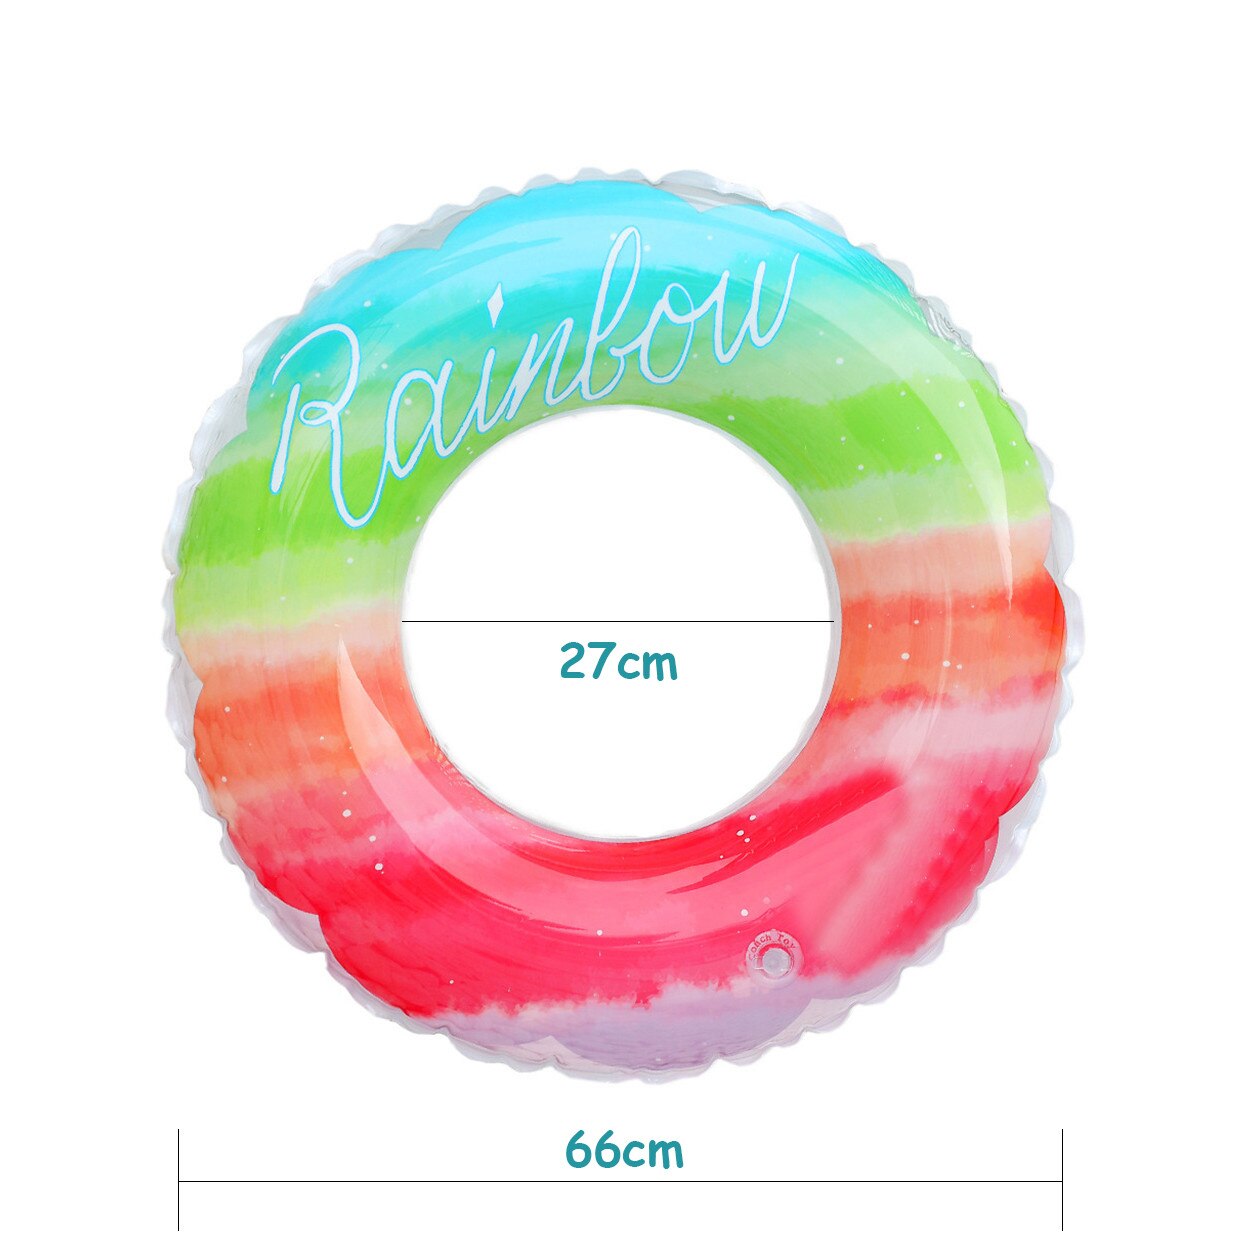 Kids Baby Summer Beach Inflatable Ring Floating Swim Ring Water Toy Rainbow Colorful Safety Swimming Rings For Pool River Beach: 10-15 Years 